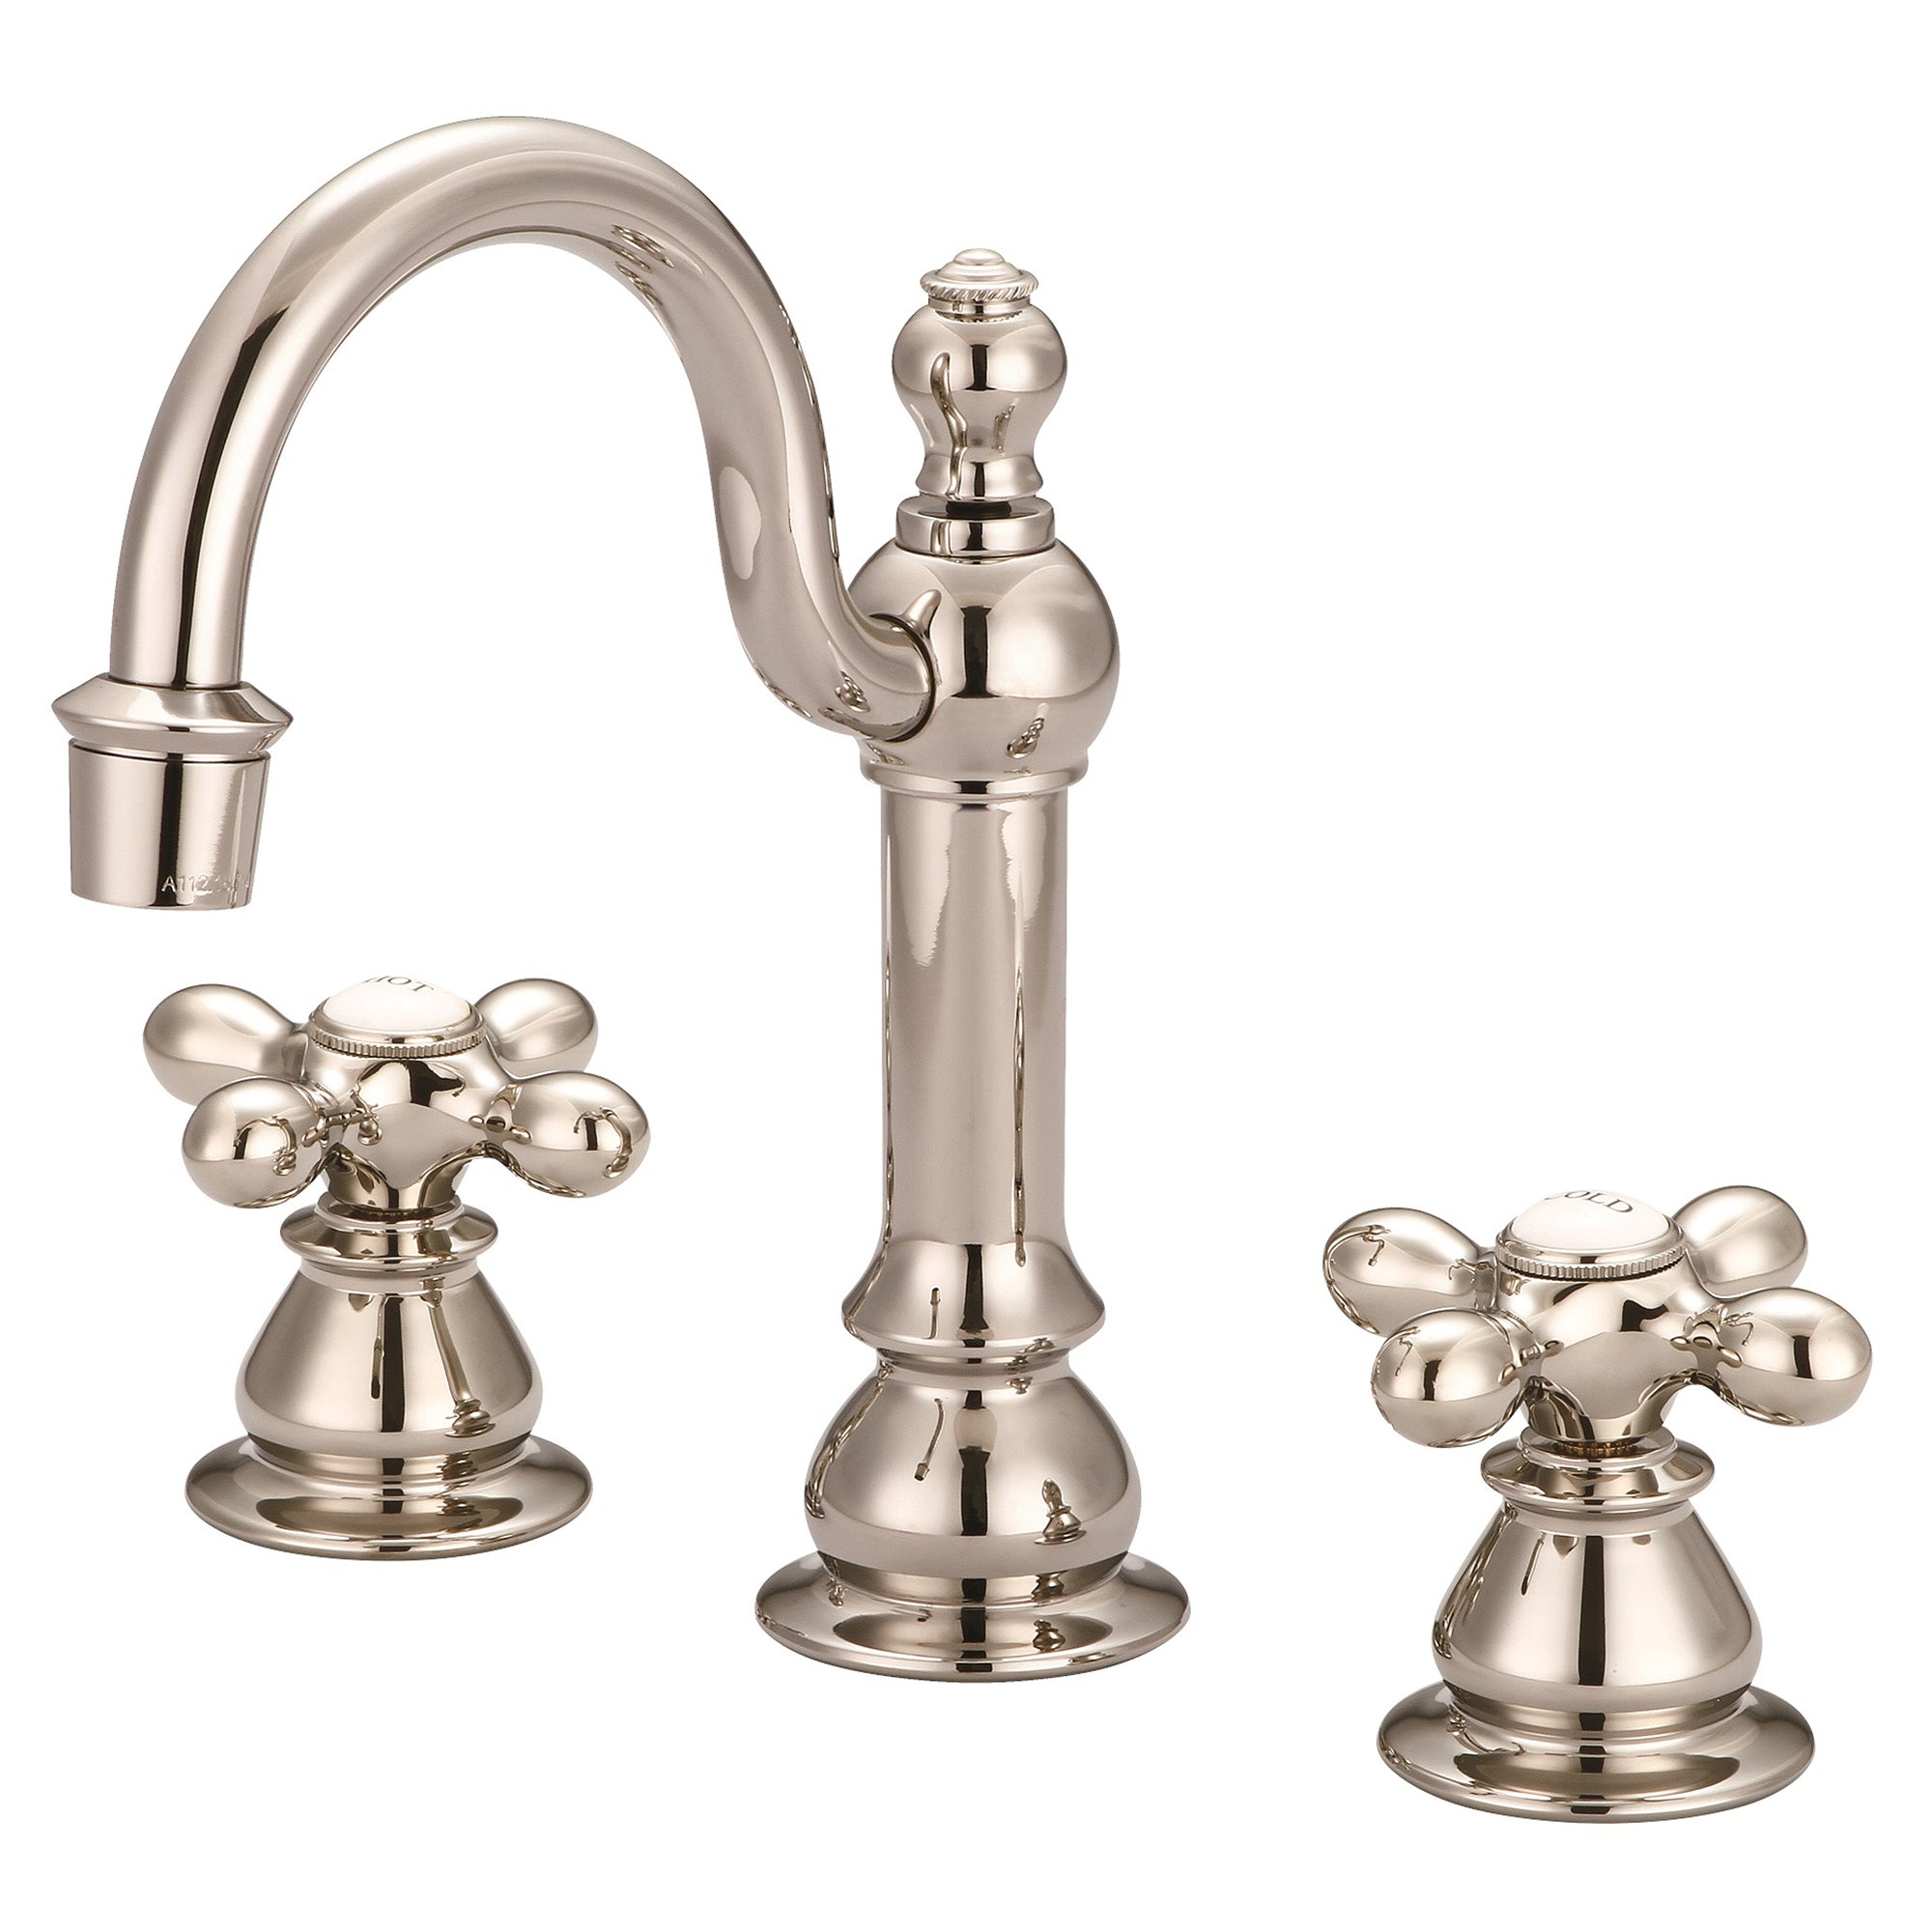 Water Creation | American 20th Century Classic Widespread Lavatory F2-0012 Faucets With Pop-Up Drain in Polished Nickel (PVD) Finish With Metal Cross Handles, Hot And Cold Labels Included | F2-0012-05-AX